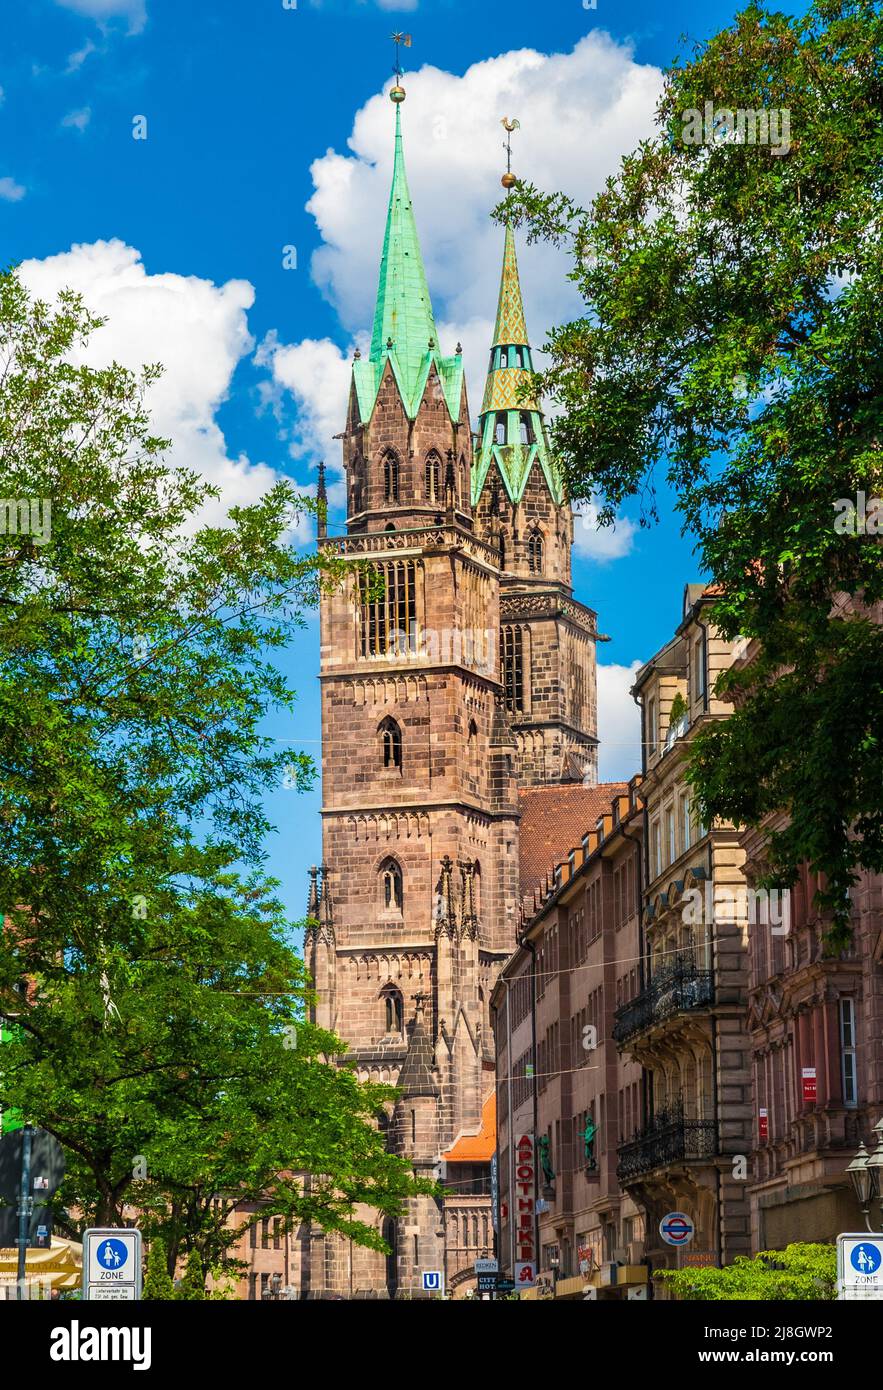 Gorgeous street view with the prominent two towers of the famous St. Lawrence (St. Lorenz), a medieval church in Nuremberg, Germany, on a sunny summer... Stock Photo